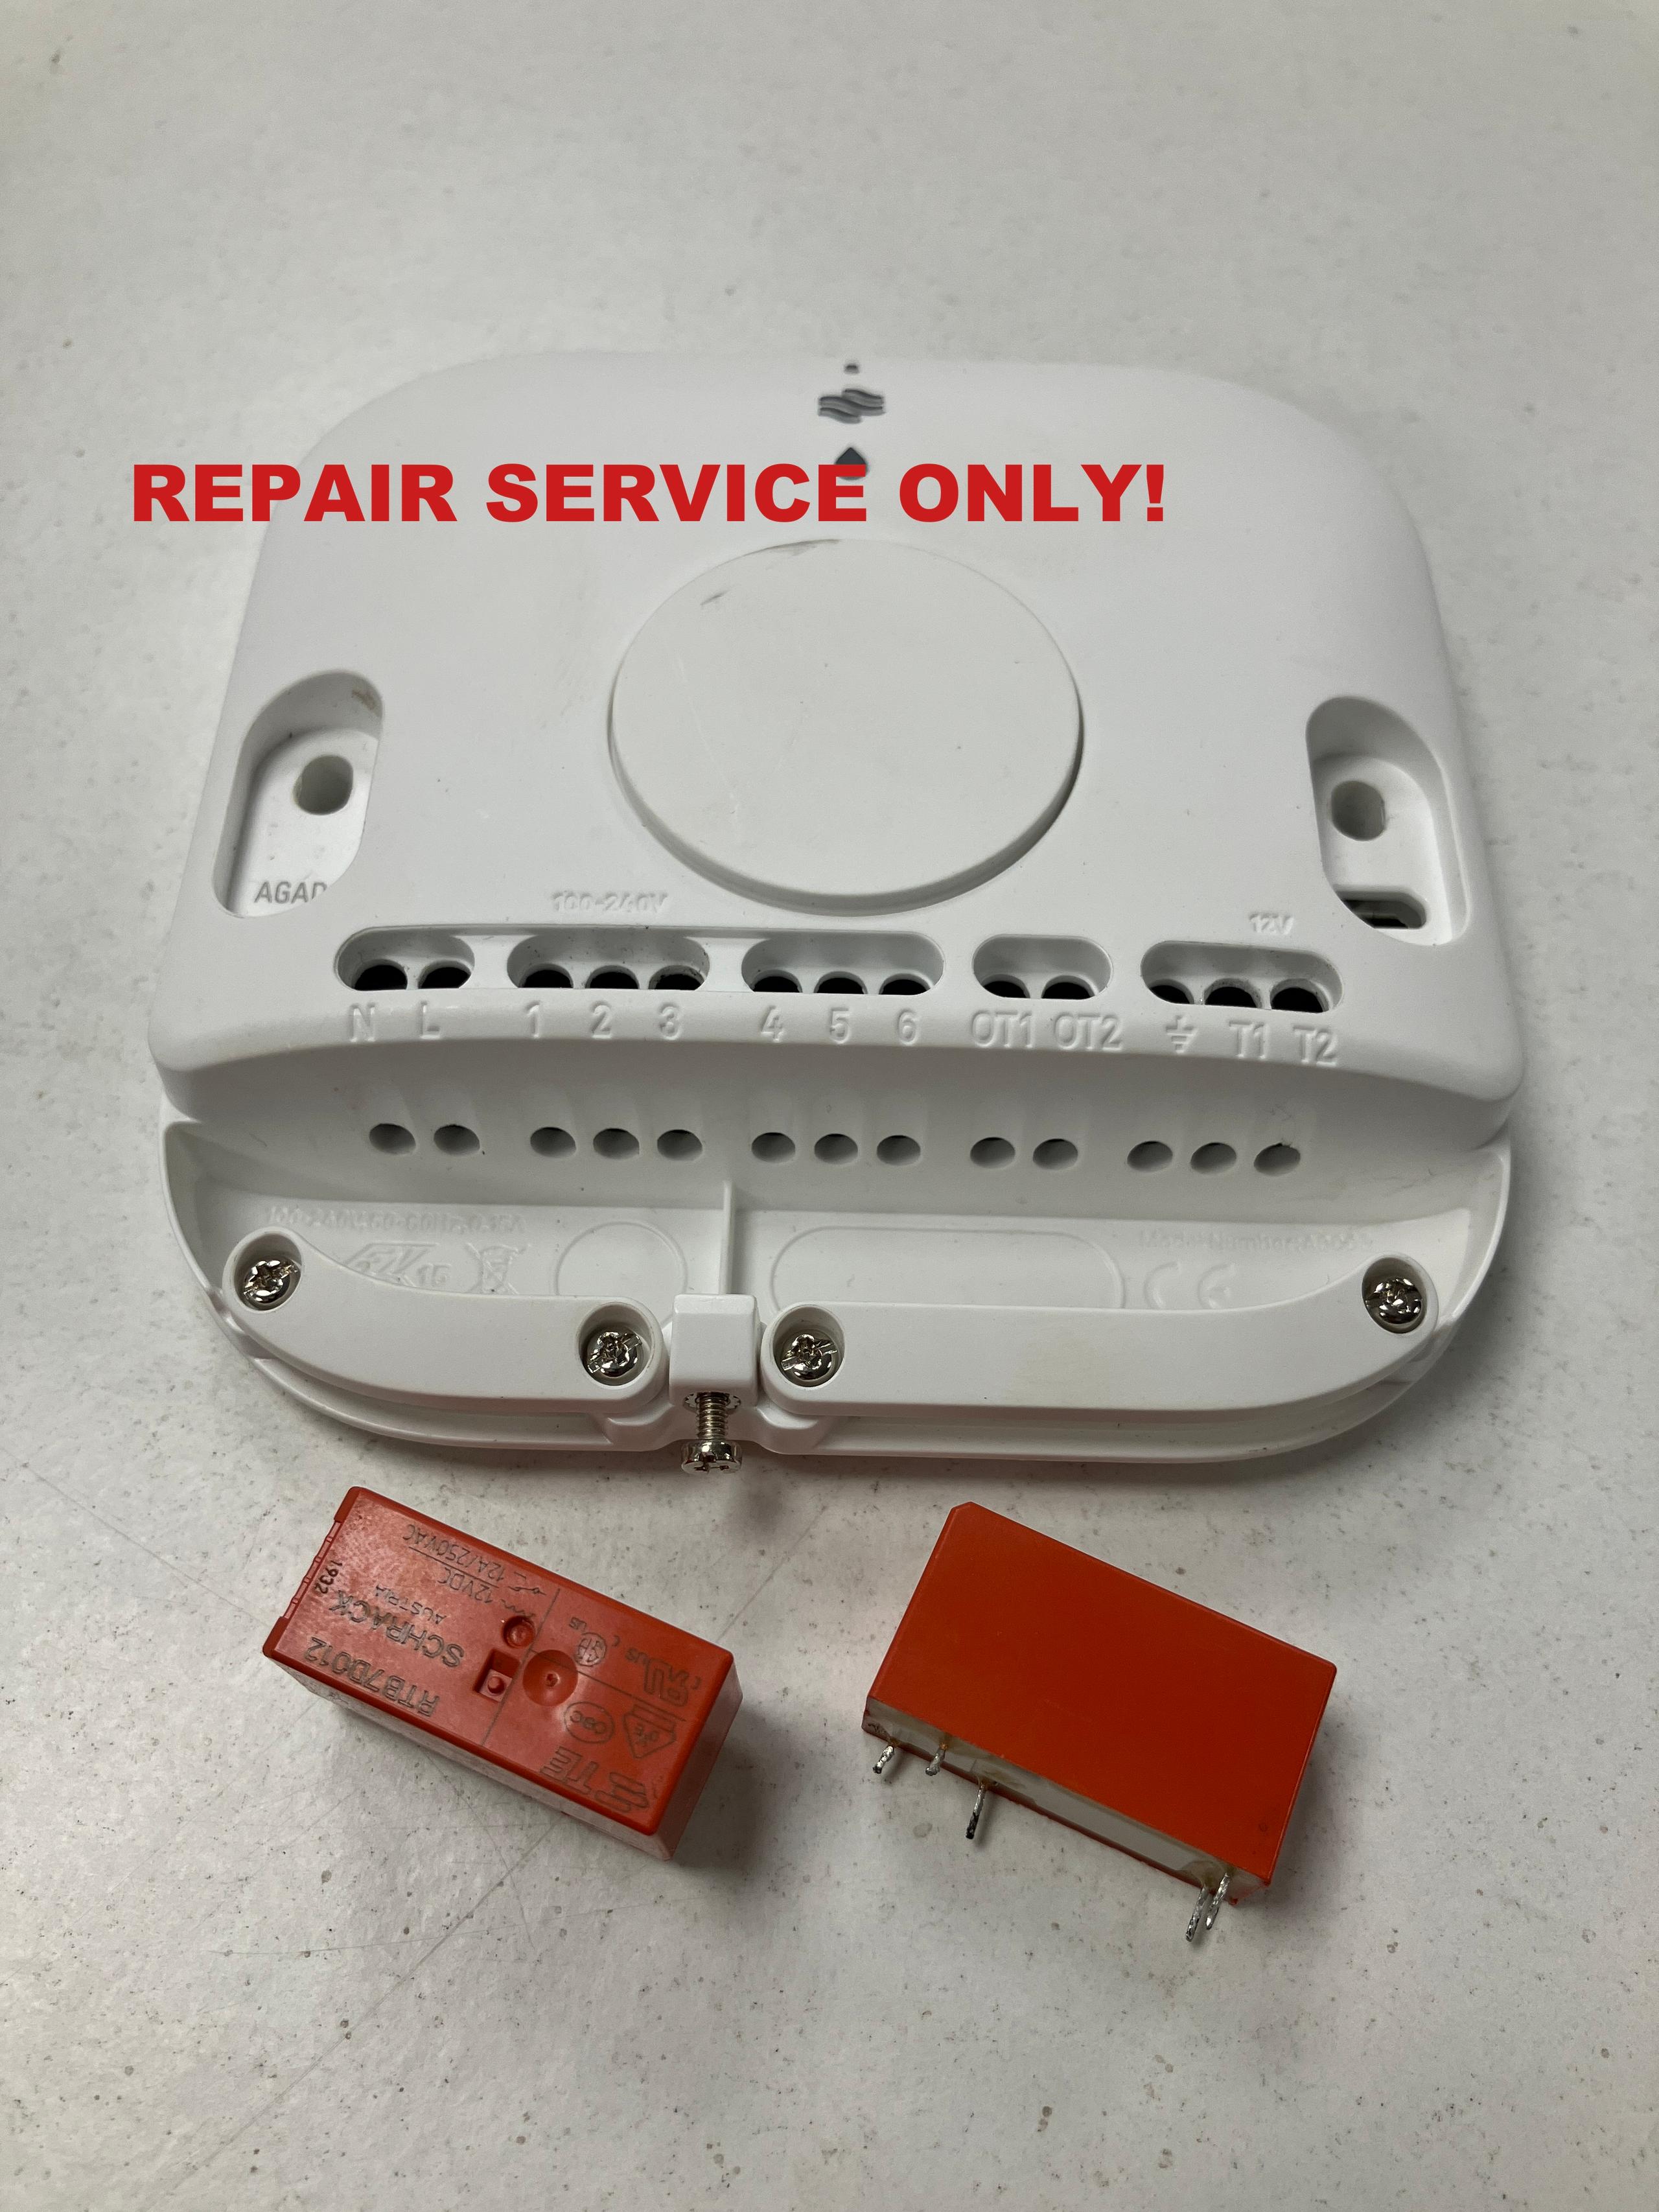 Google Nest Heat Link Repair Service 3rd Gen 12mth wty RELAY REPLACEMENT ONLY!